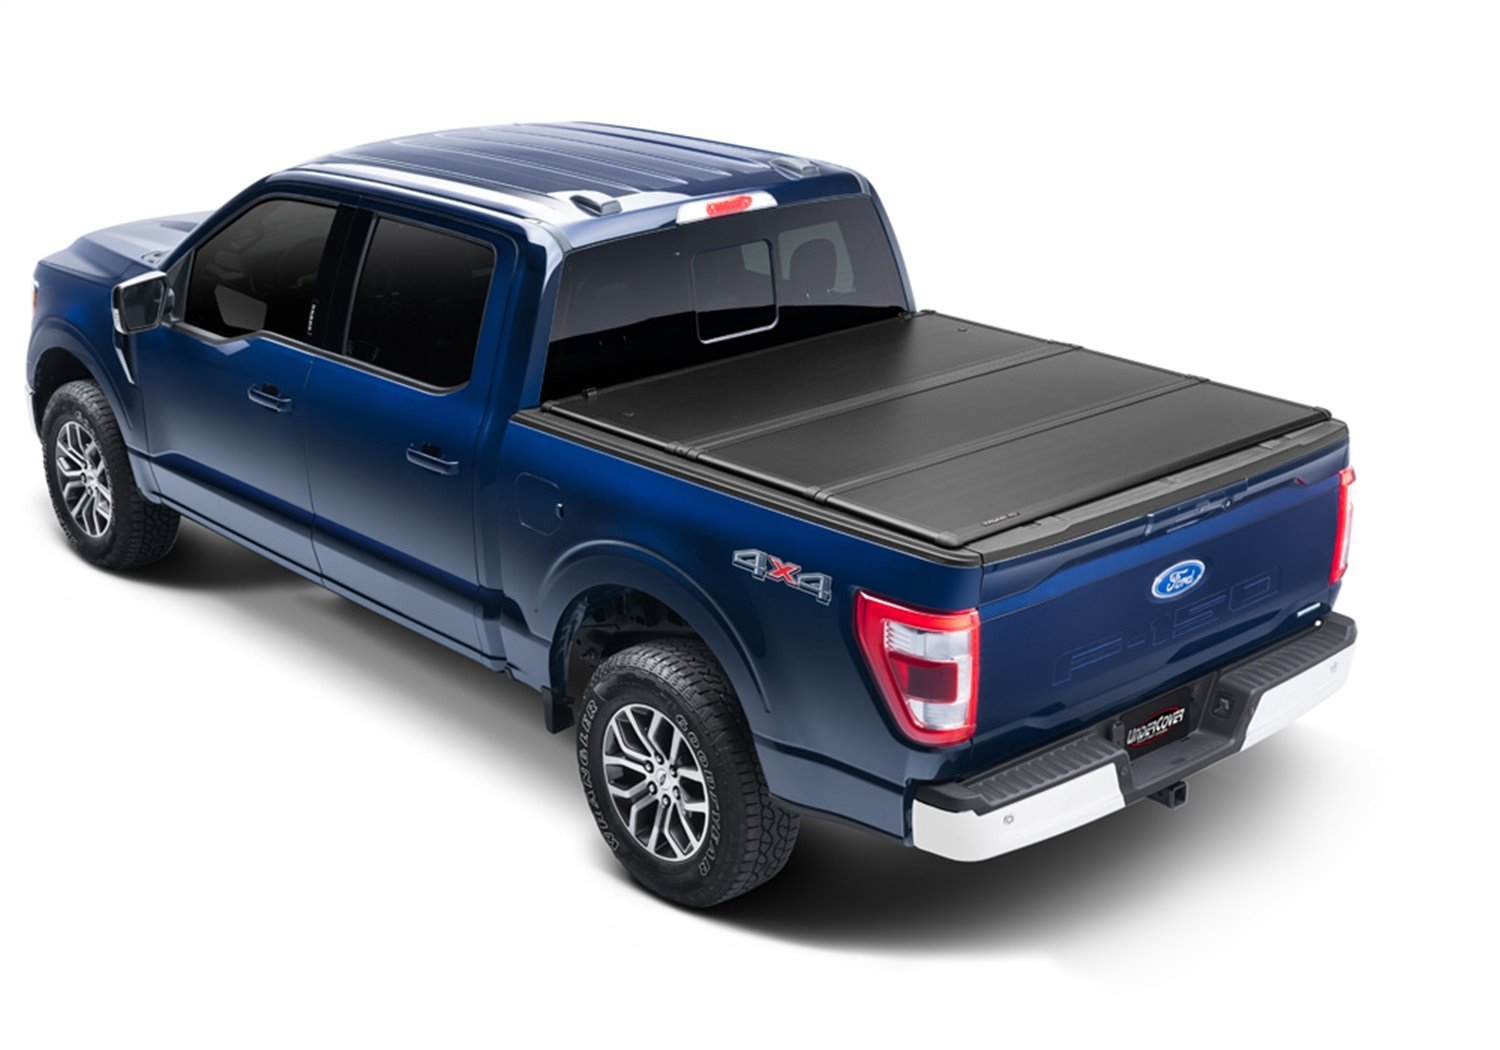 TR26021 Triad Hard Folding Cover, Fits Select Ford F-250/350 6'10" Bed